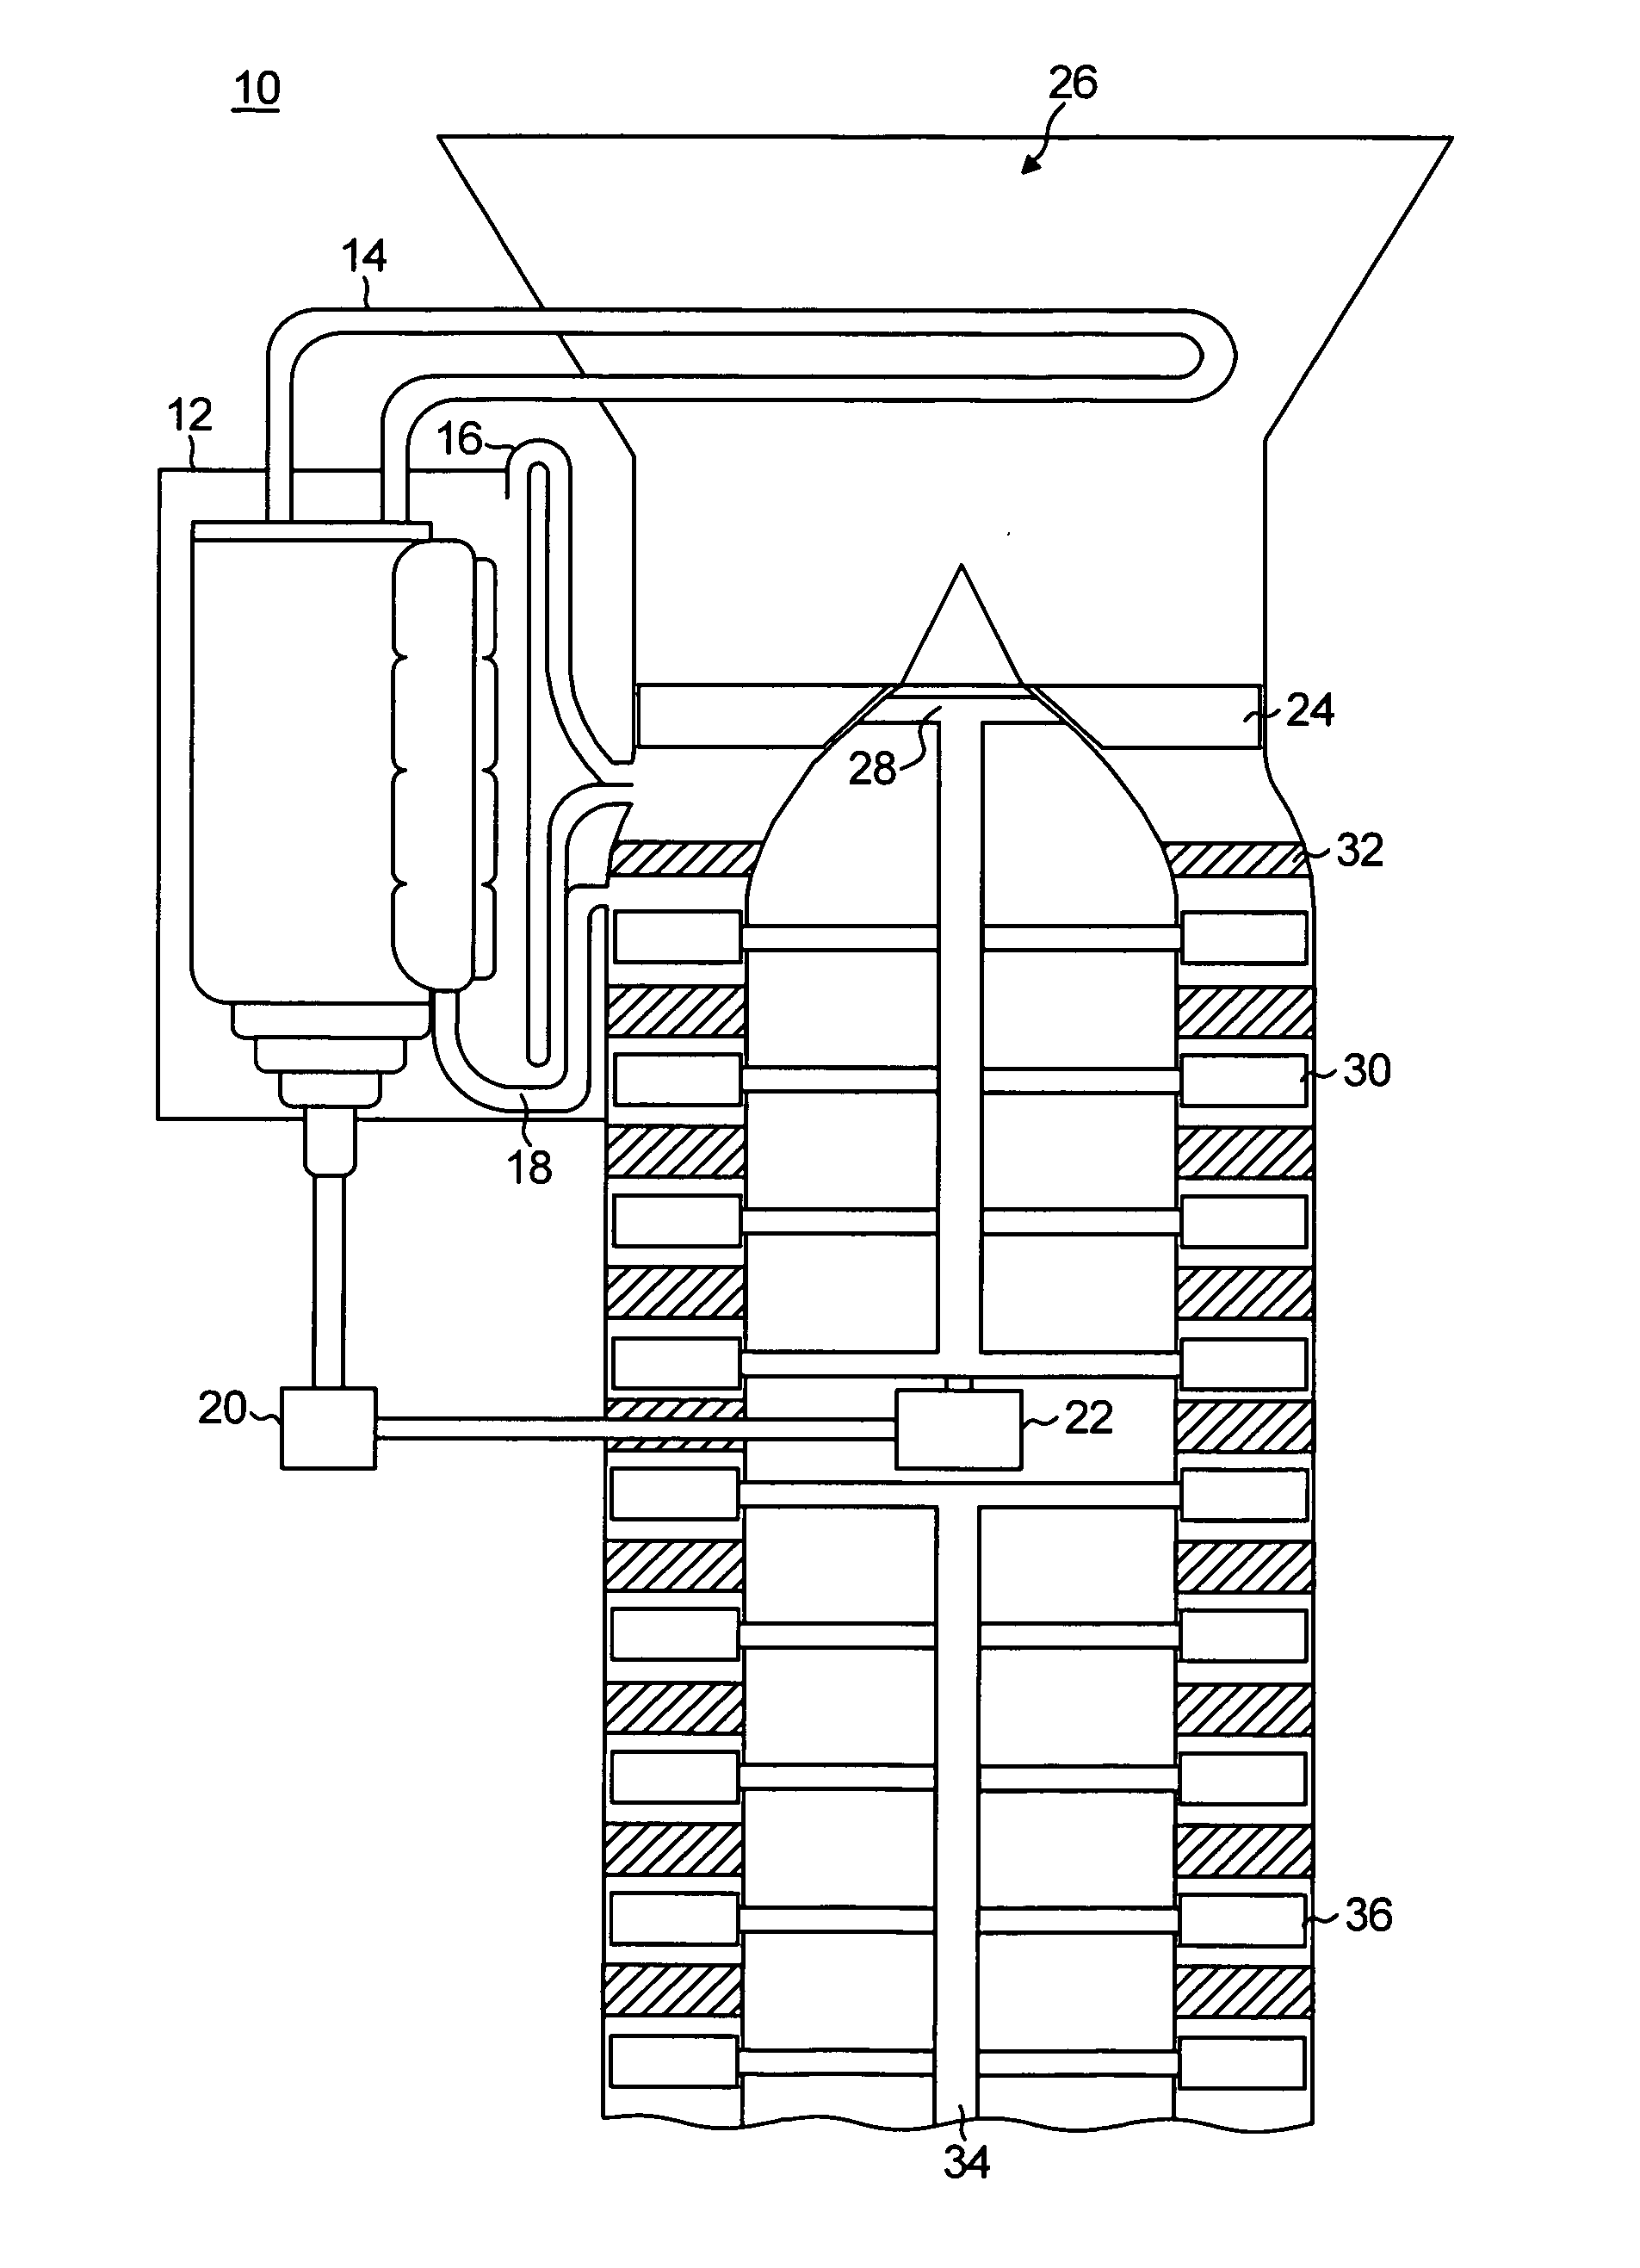 Hybrid air turbine engine with heat recapture system for moving vehicle